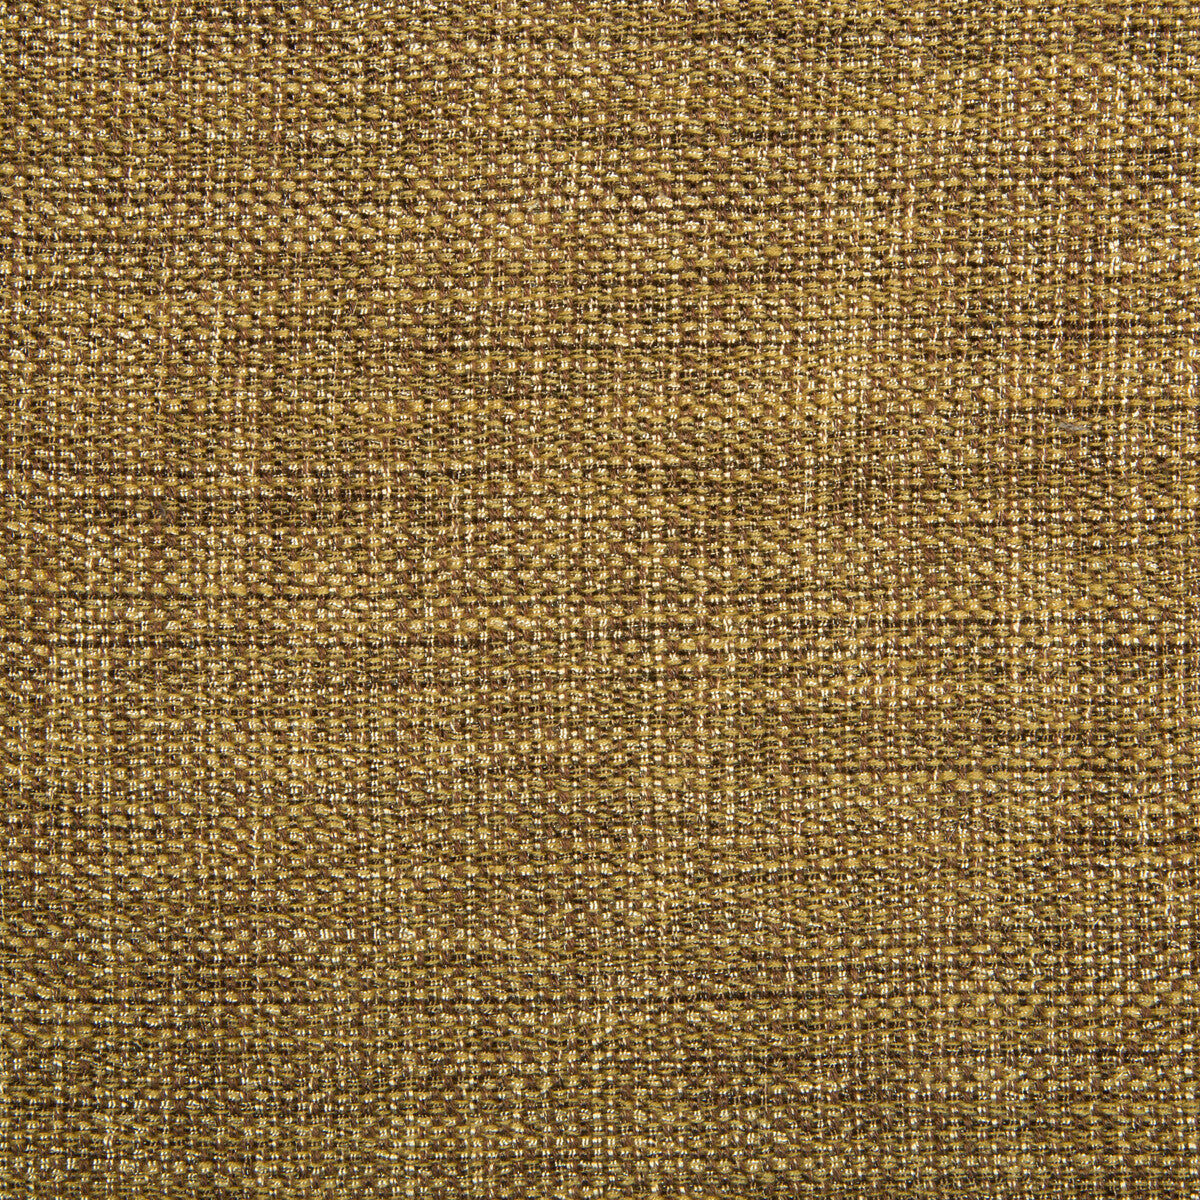 Kravet Contract fabric in 34926-616 color - pattern 34926.616.0 - by Kravet Contract